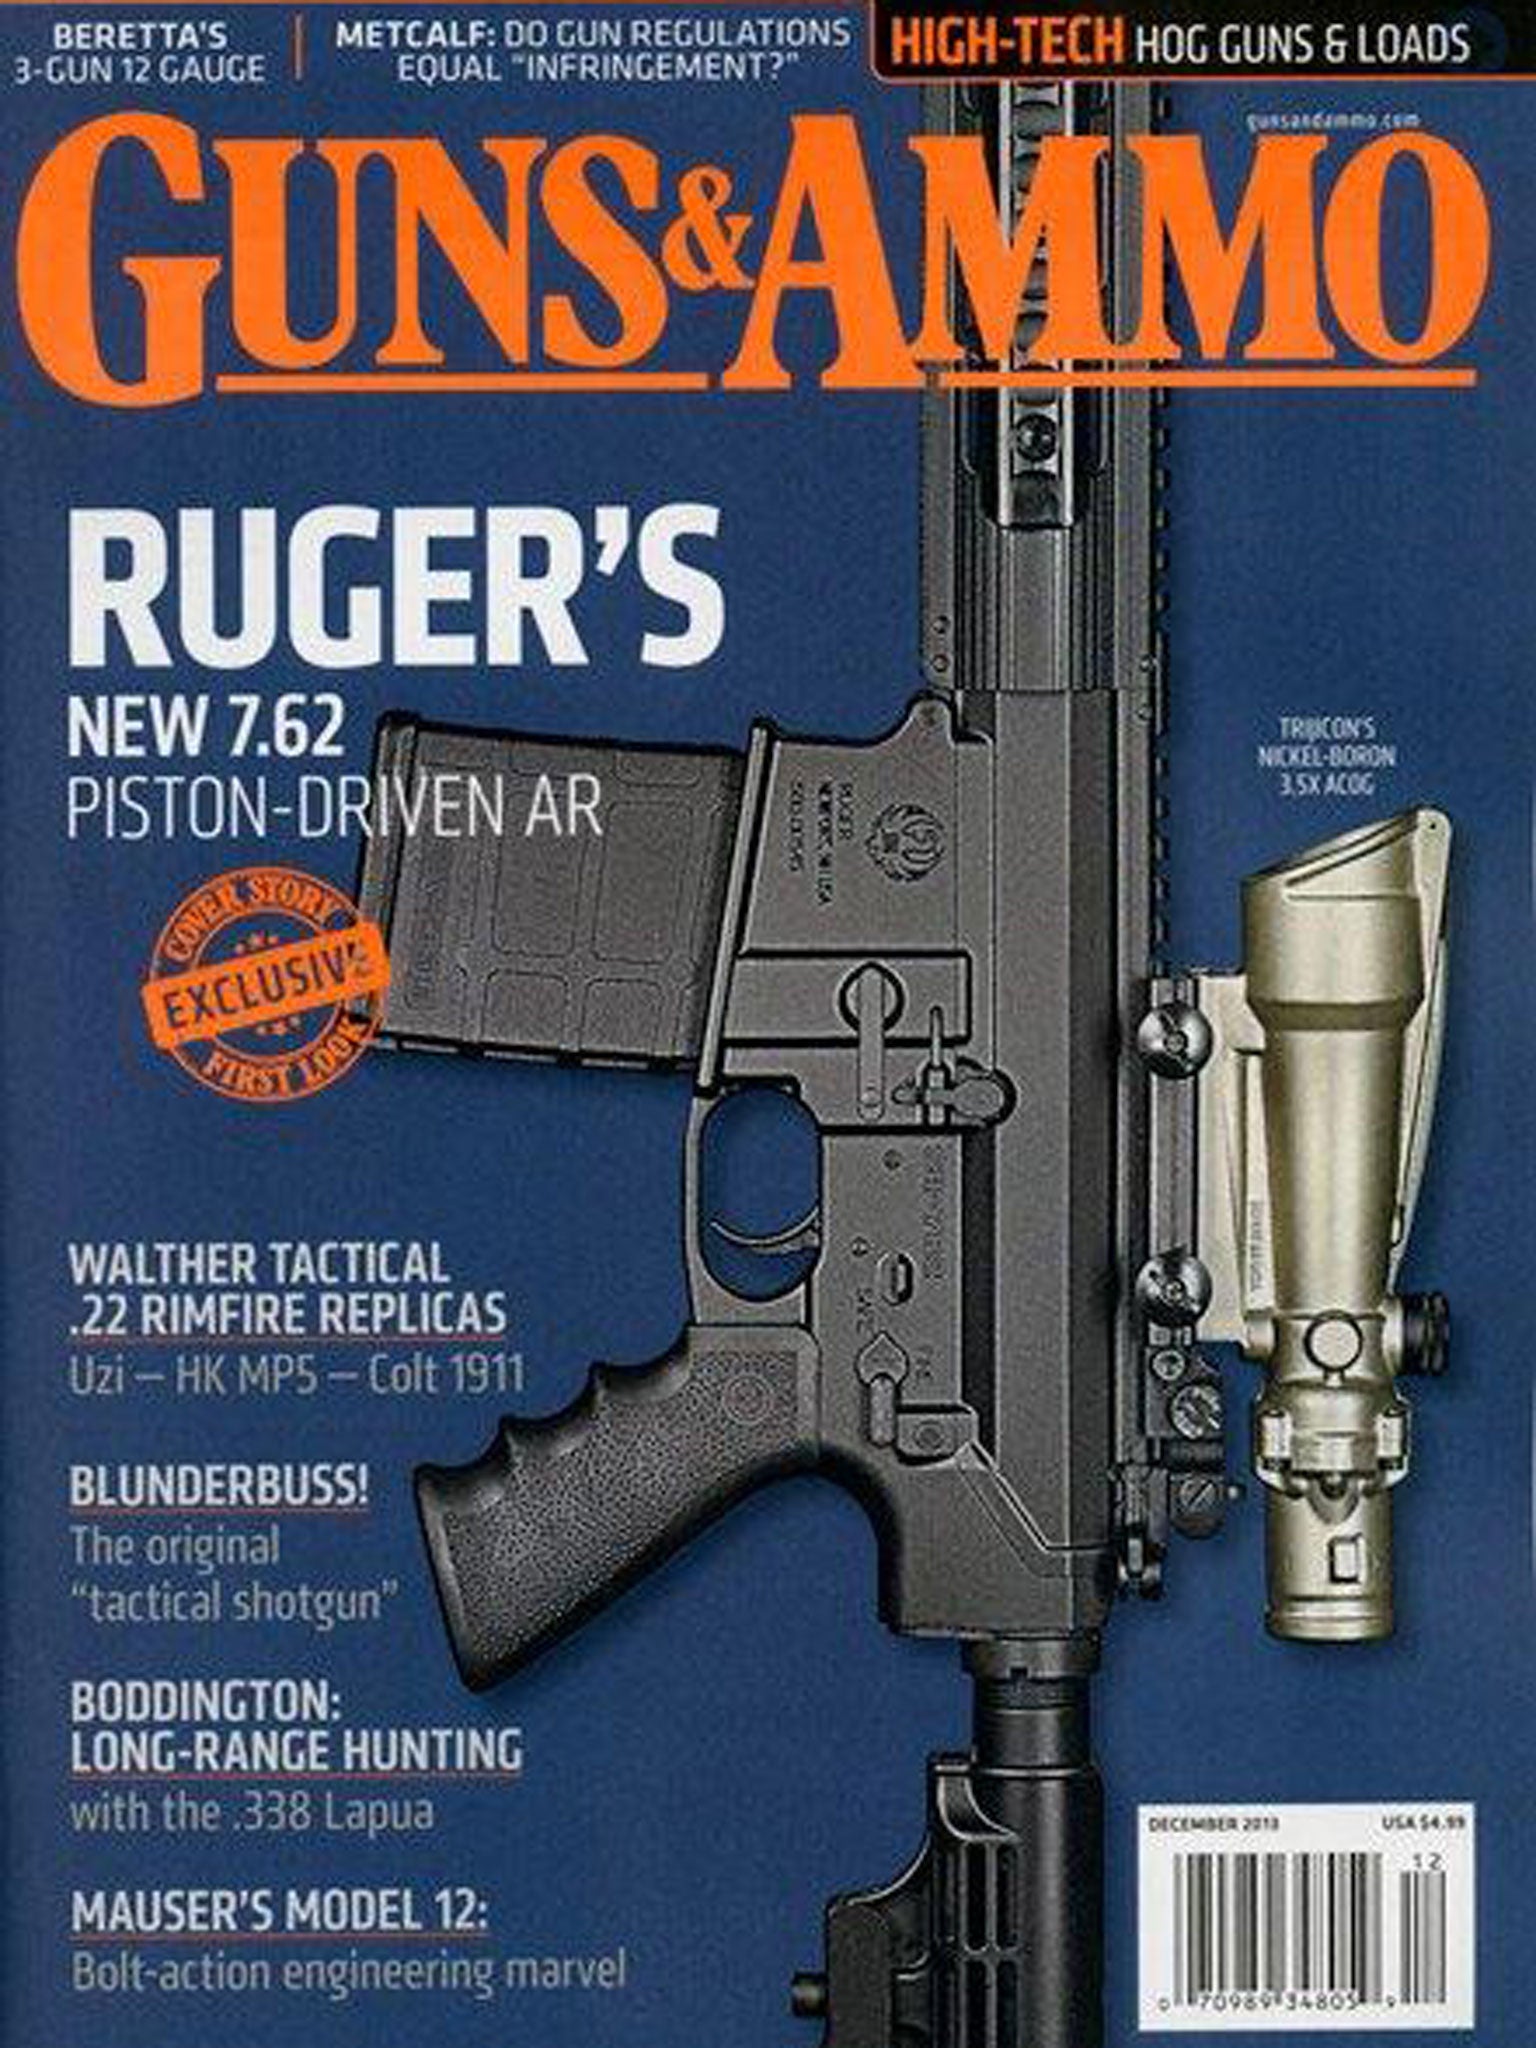 Latest issue of Guns & Ammo in which Dick Metcalf discussed the difference between regulation and infringement of gun laws. He has since been fired